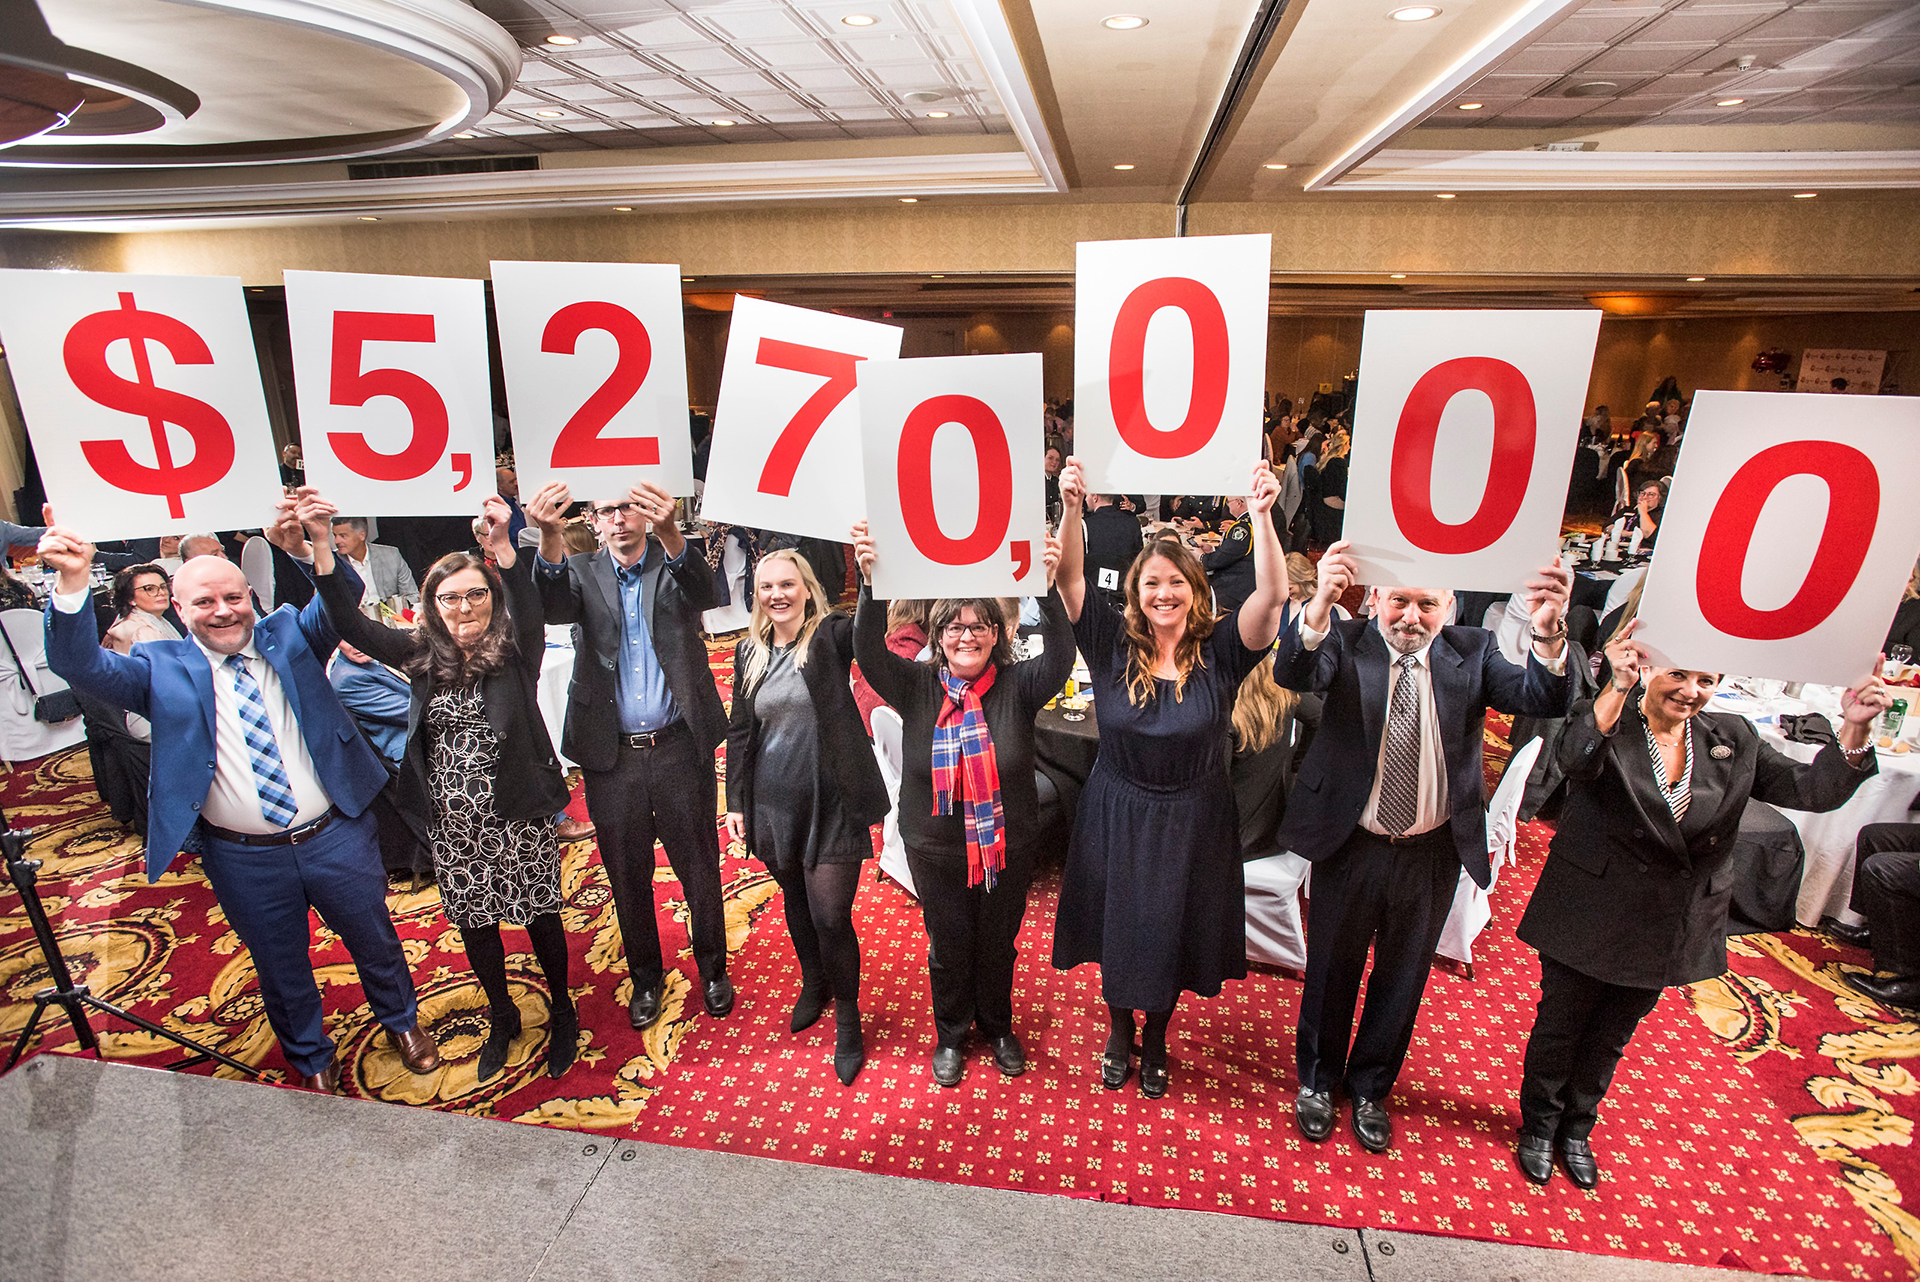 United Way Niagara supports more than 175,000 people